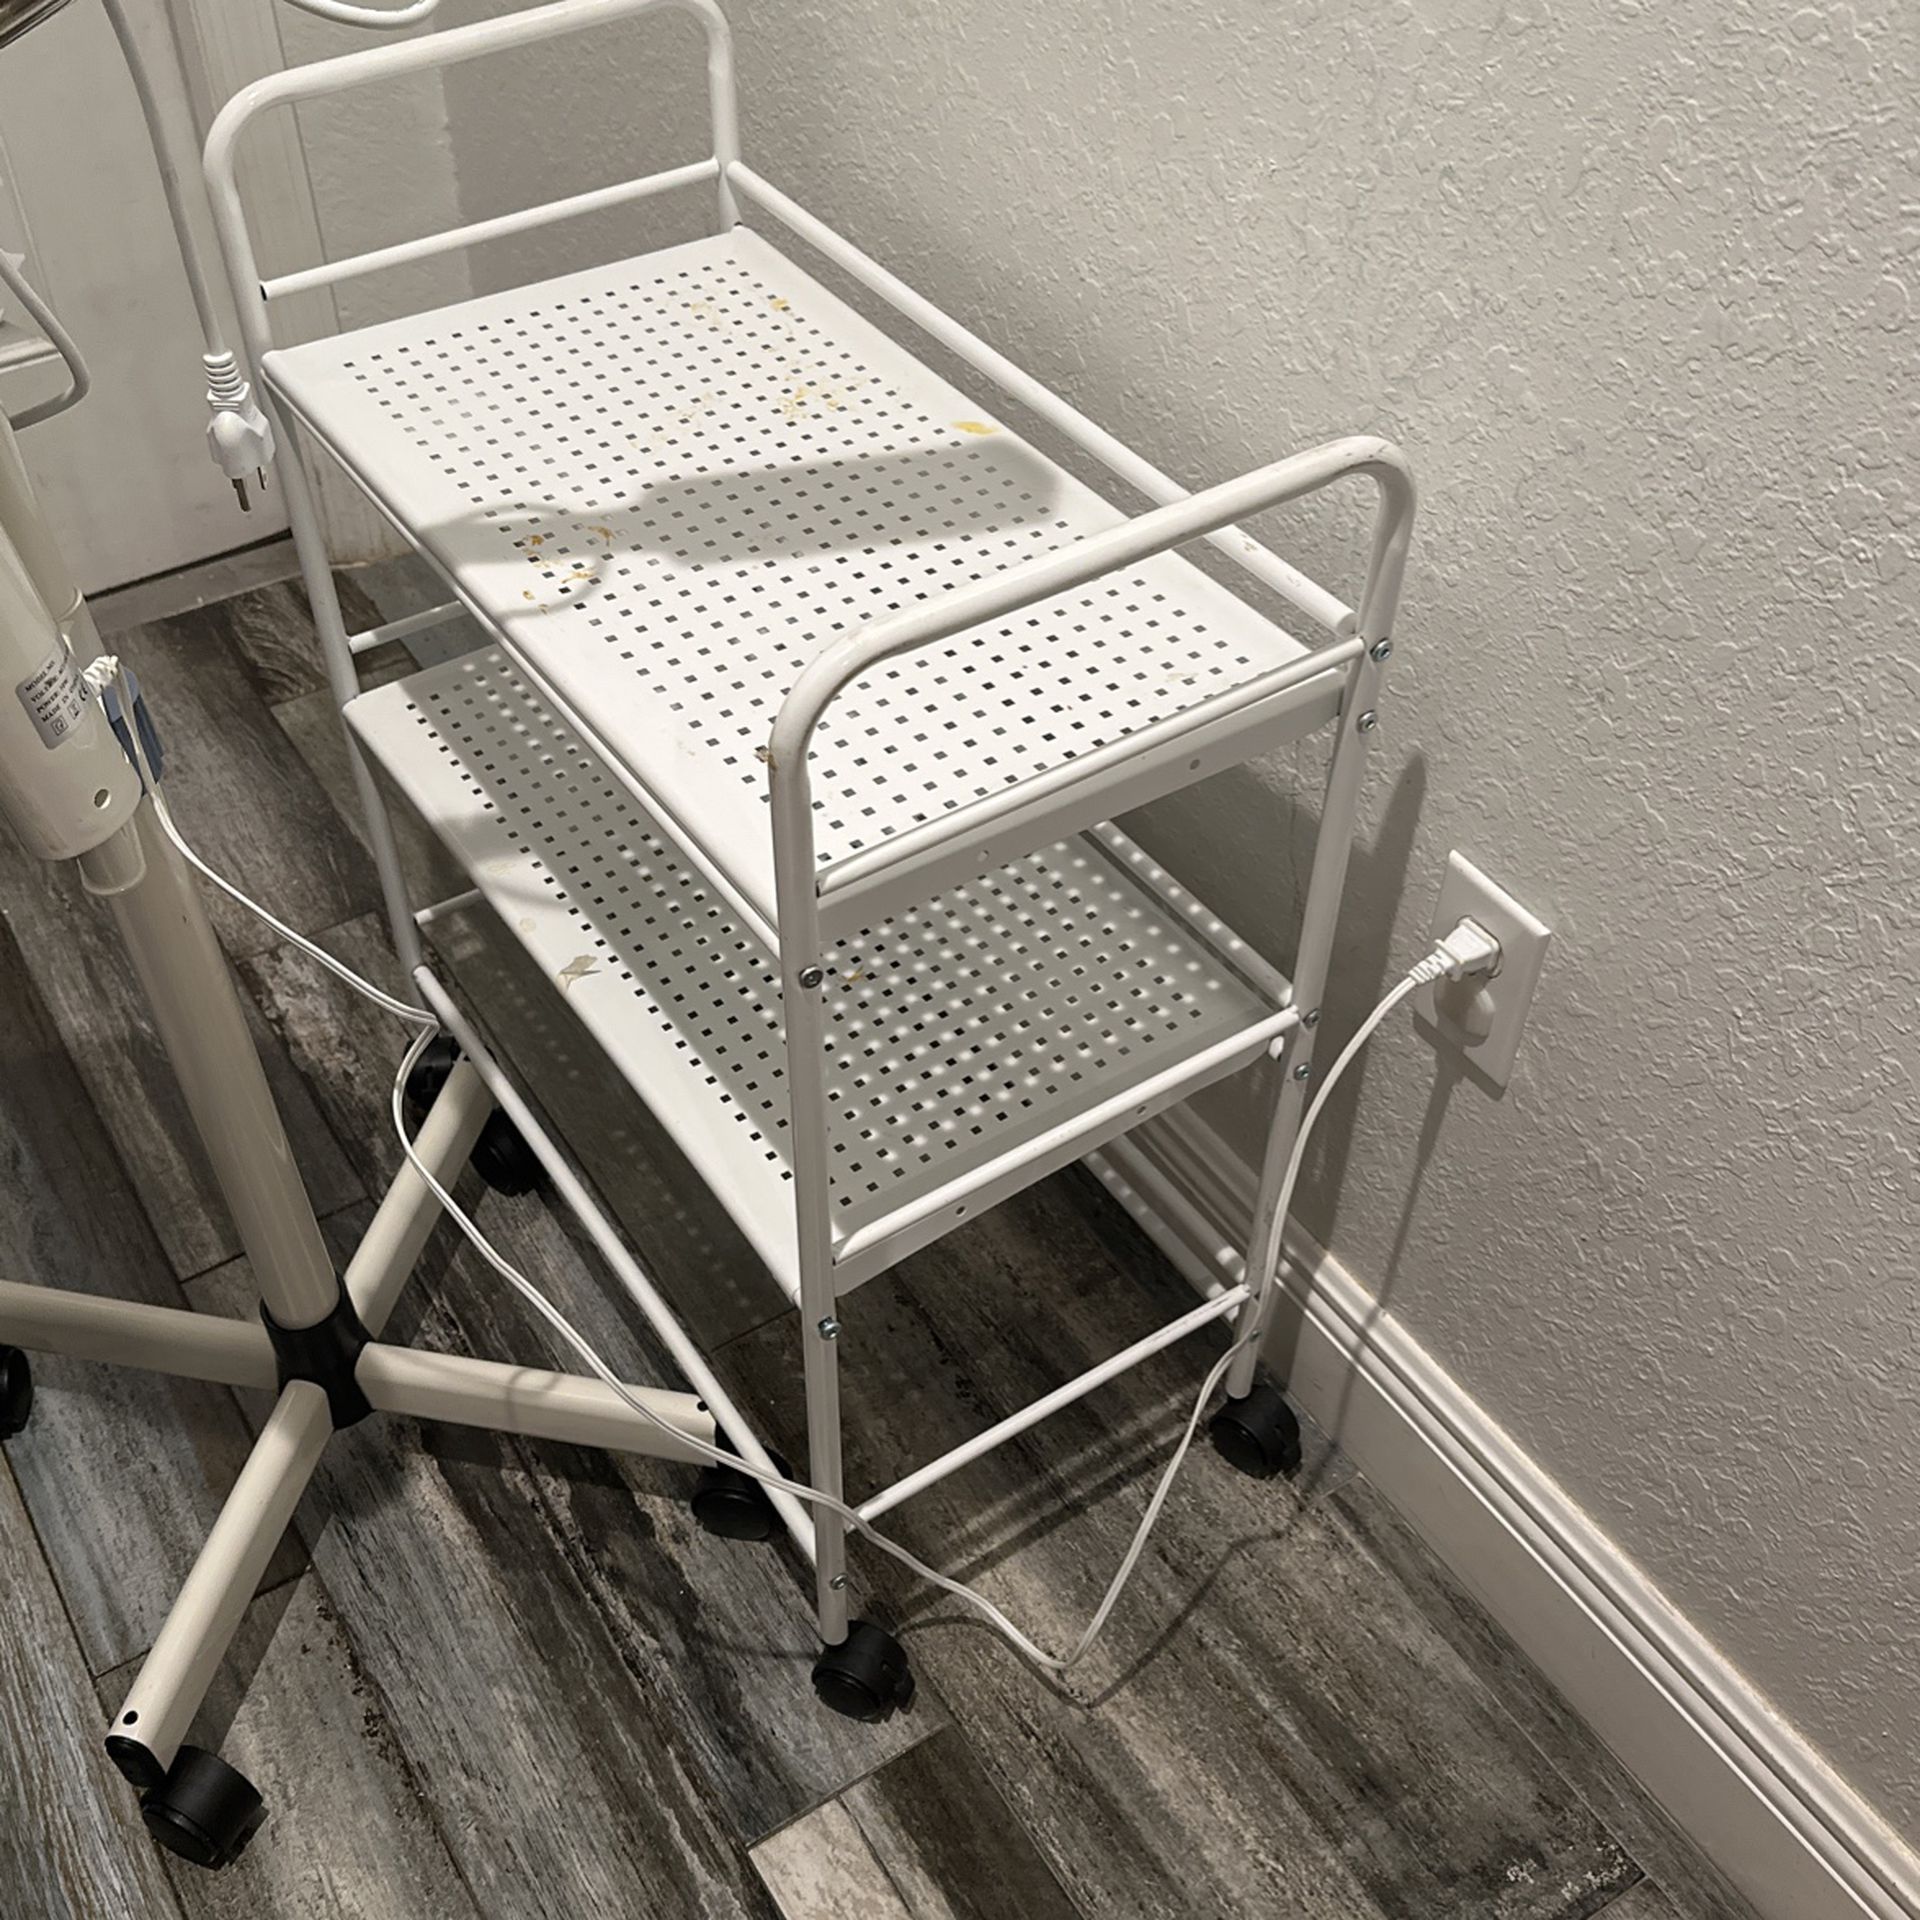 Wax/Facial Products Rolling Cart